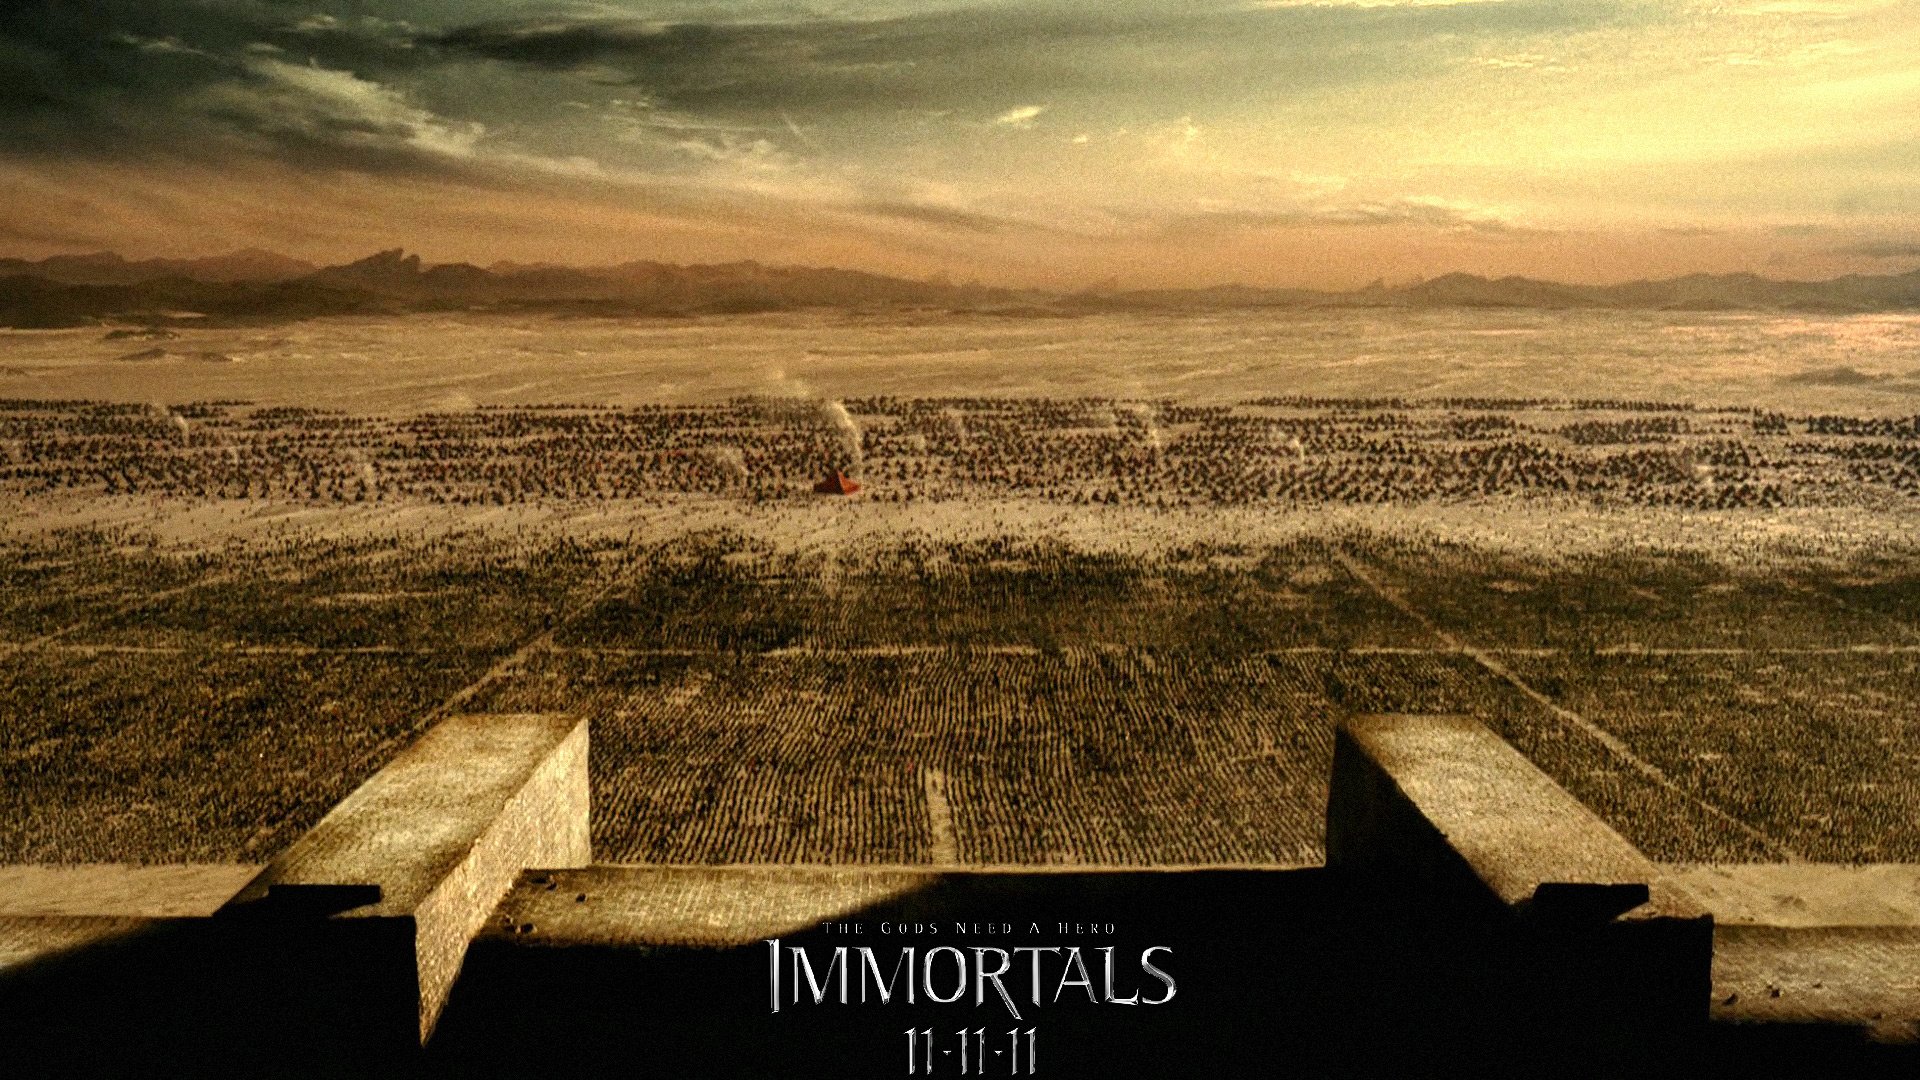 immortals, Fantasy, Action, Adventure, Movie, Film, Warrior, Poster  Wallpapers HD / Desktop and Mobile Backgrounds